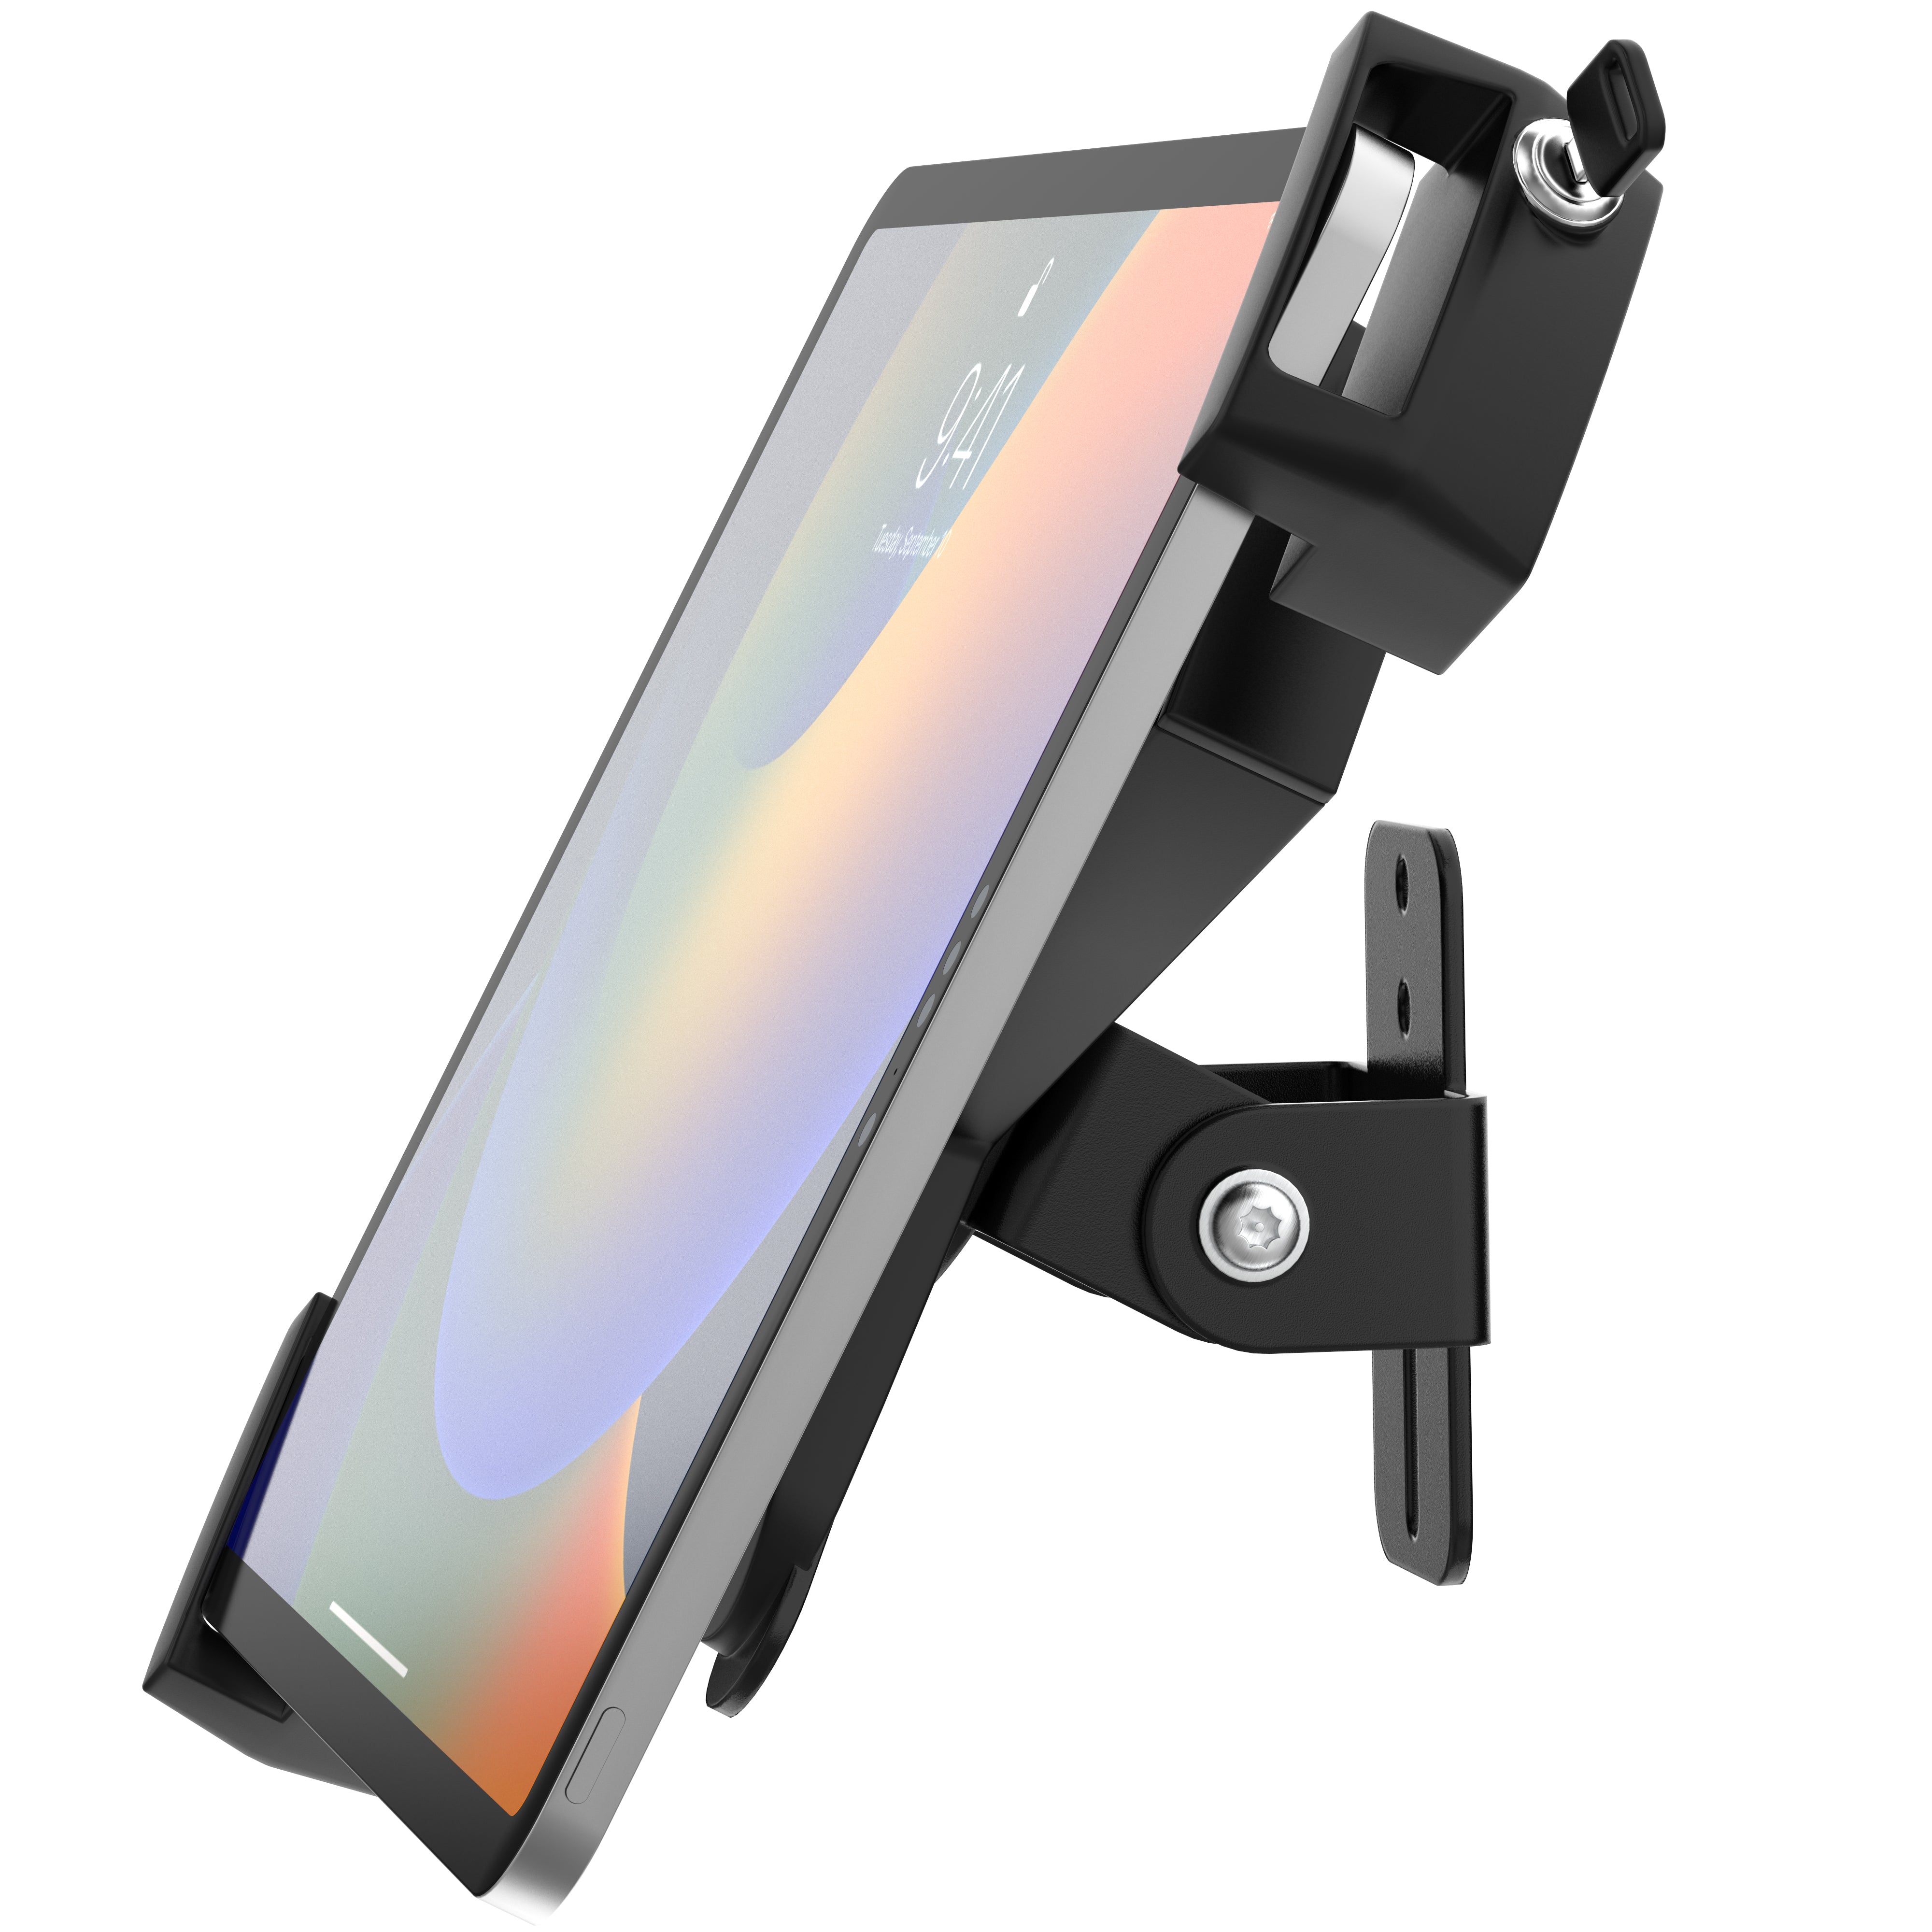 Universal Security Tablet Holder Mount for Poles, Beams, & Corners